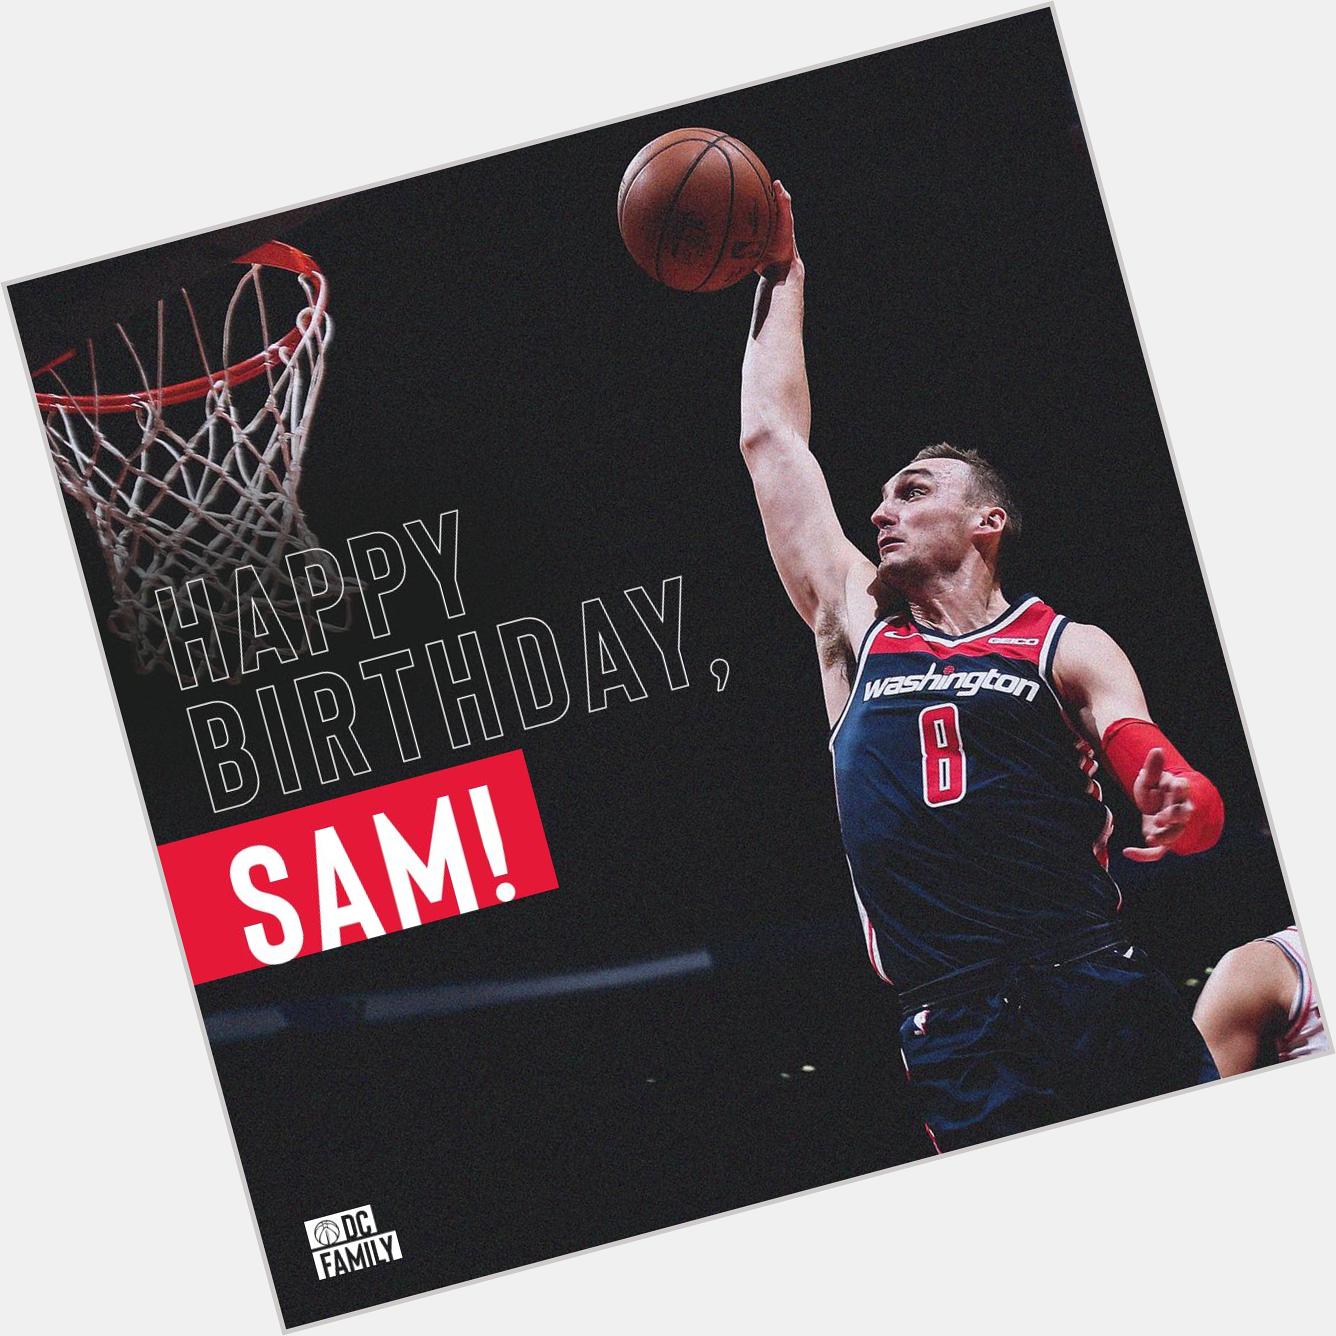 Join us in wishing Sam a very happy birthday!!   